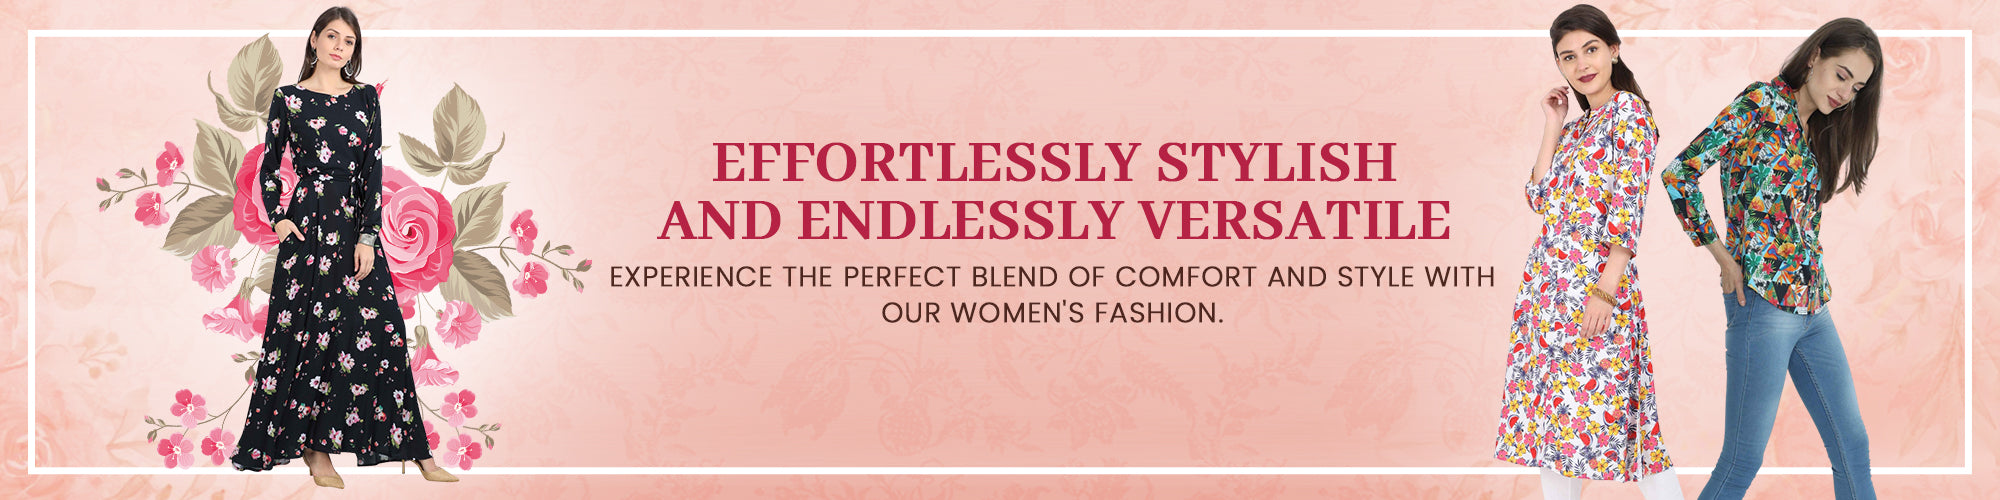 Women fashions with style and Comfort banner